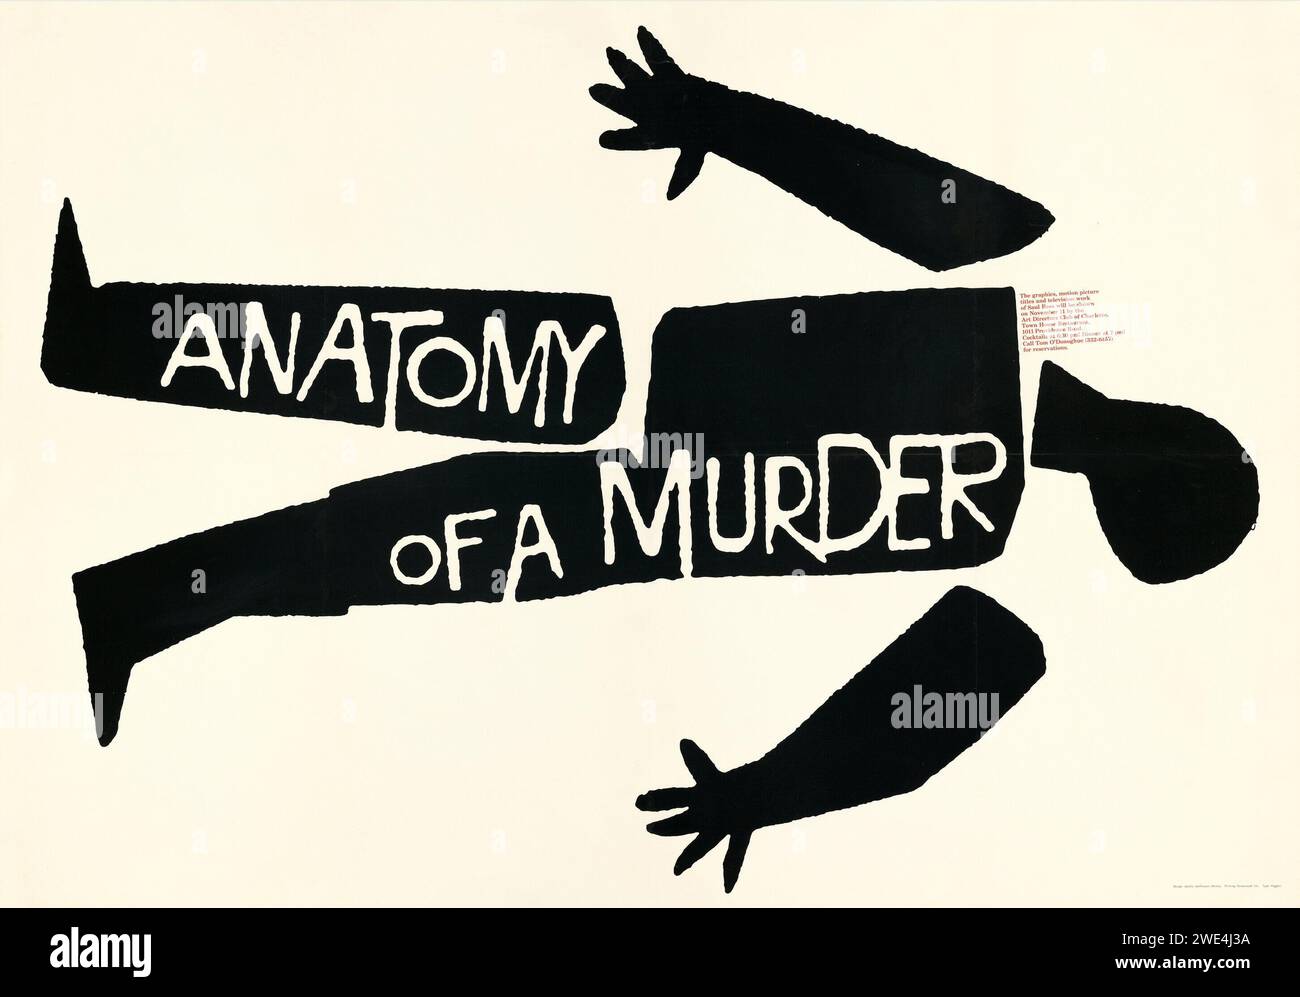 Anatomy of a Murder (Columbia, 1959). Alfred Hitchcock. Vintage Film Poster. Saul Bass Artwork. Stock Photo